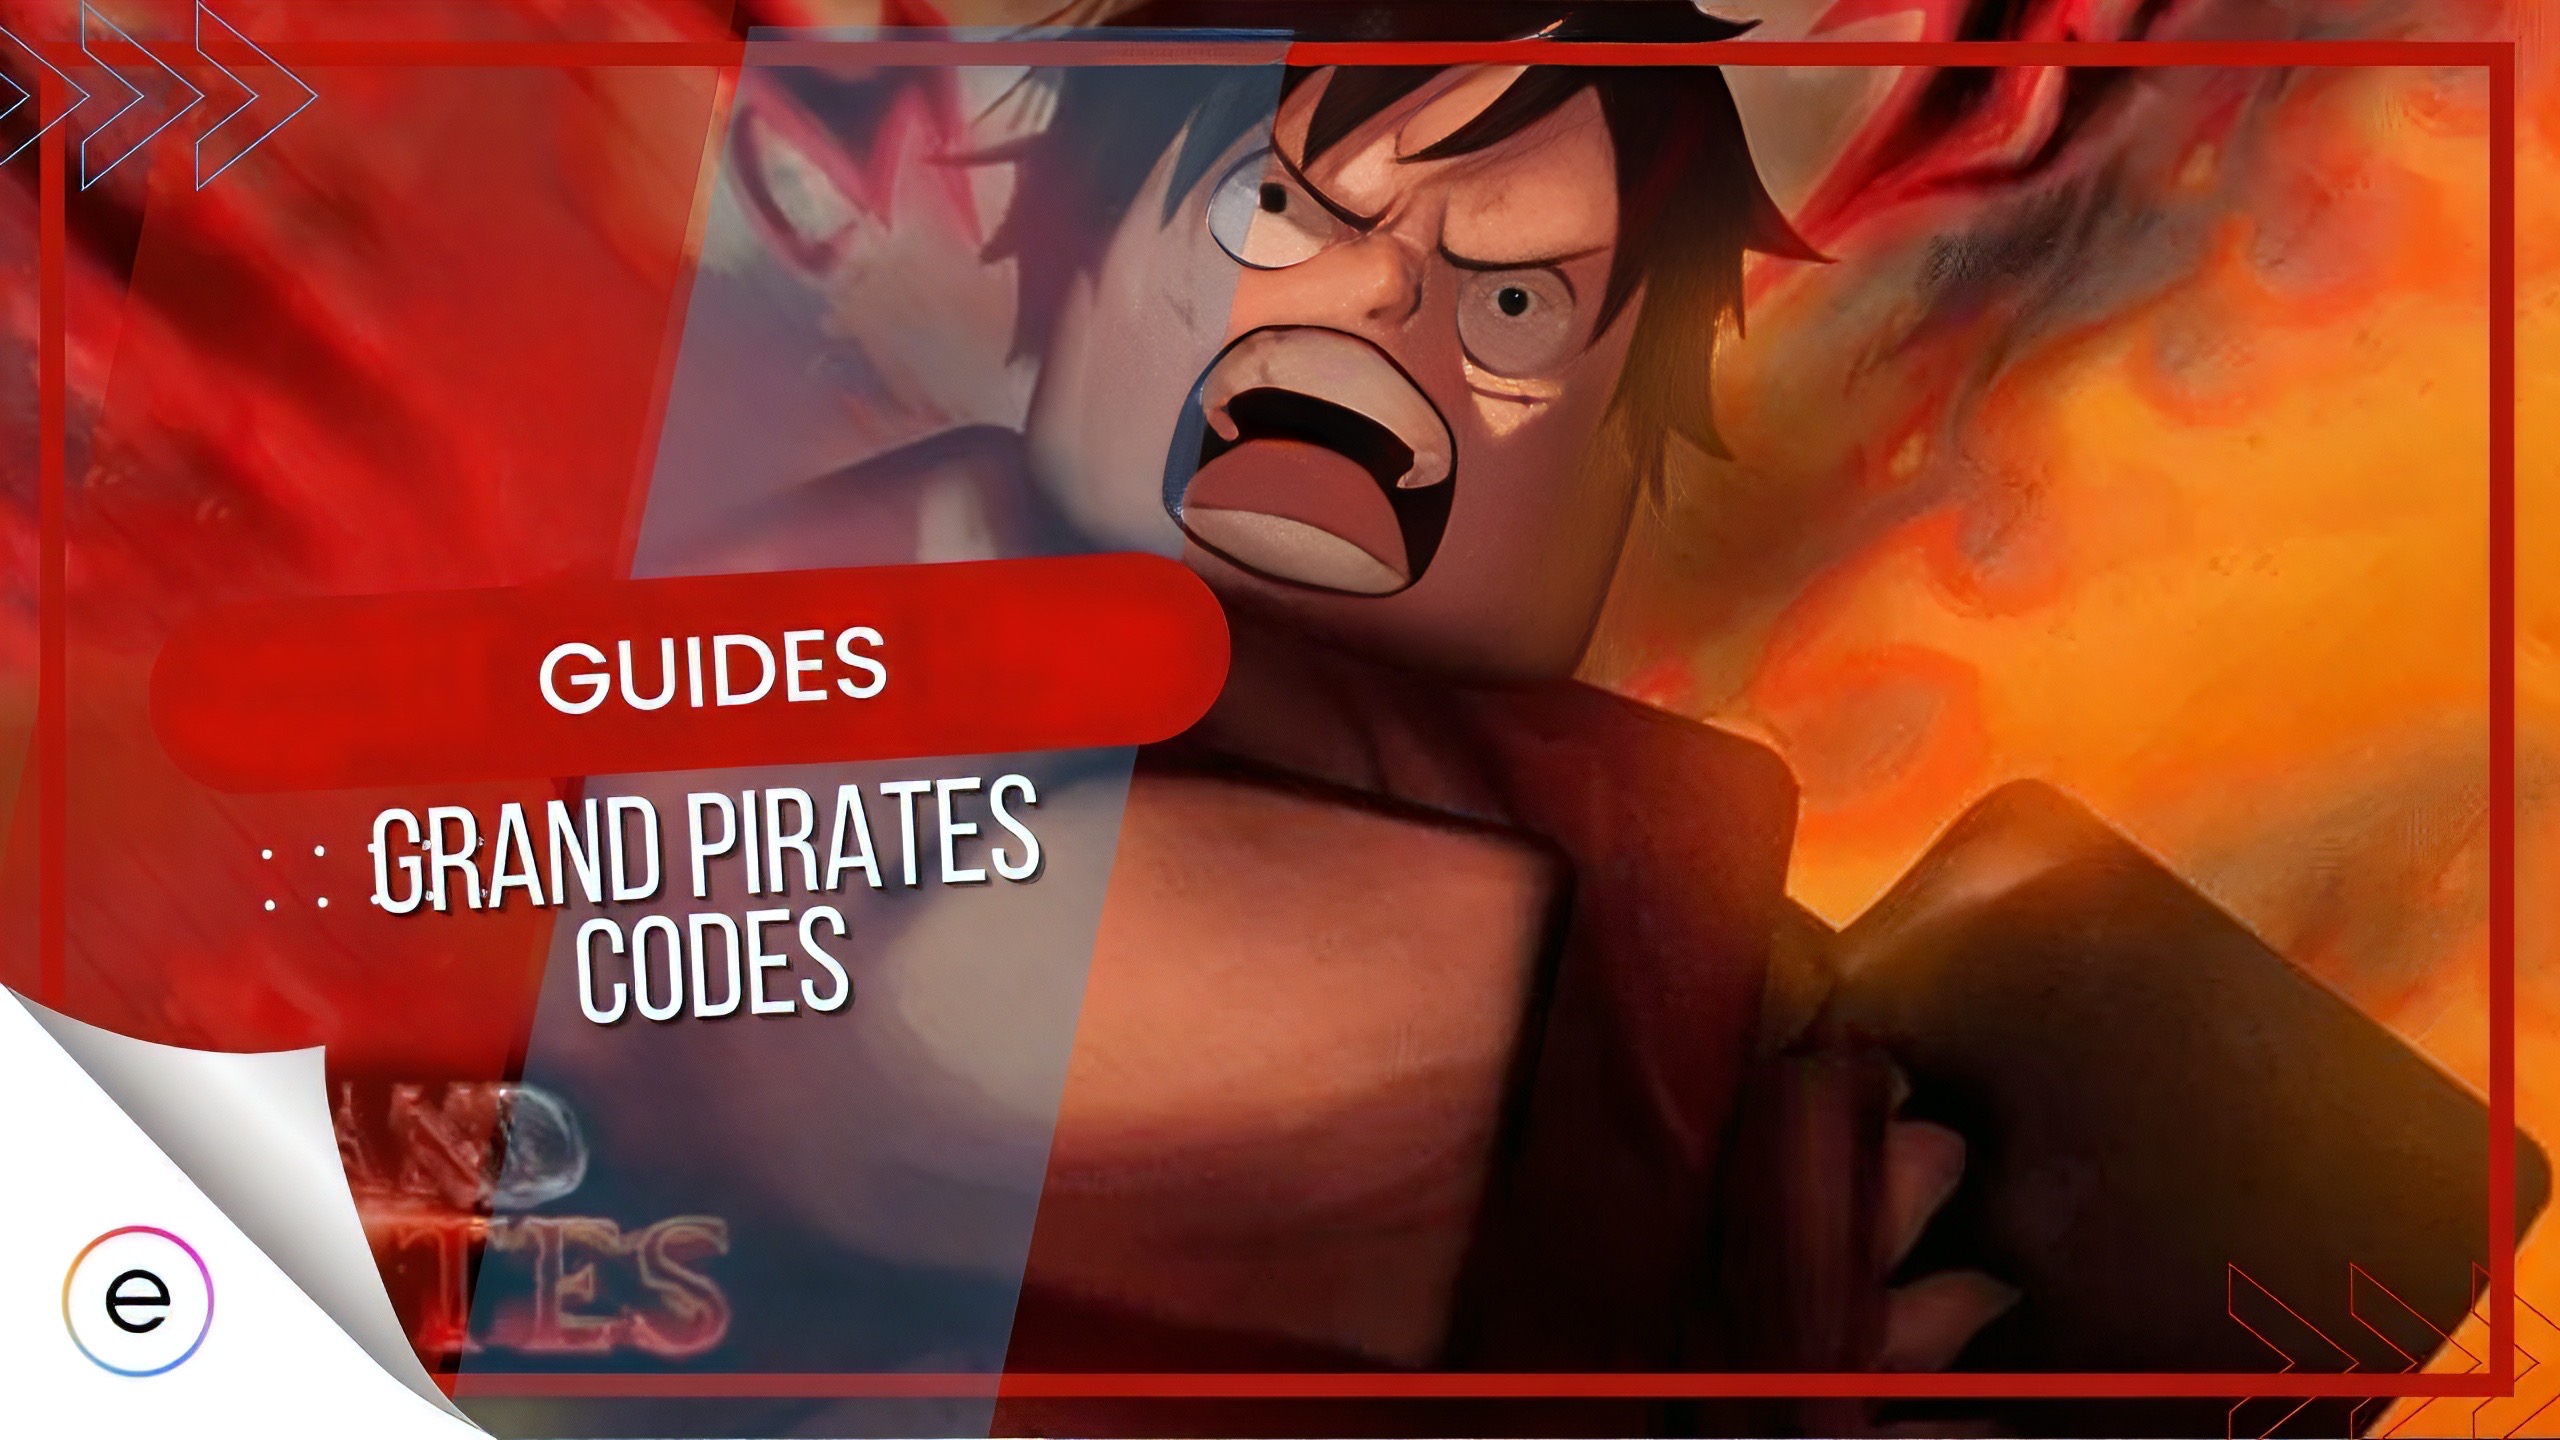 *NEW* FREE CODES Grand Pirates gives Free Devil Fruit Notifier +